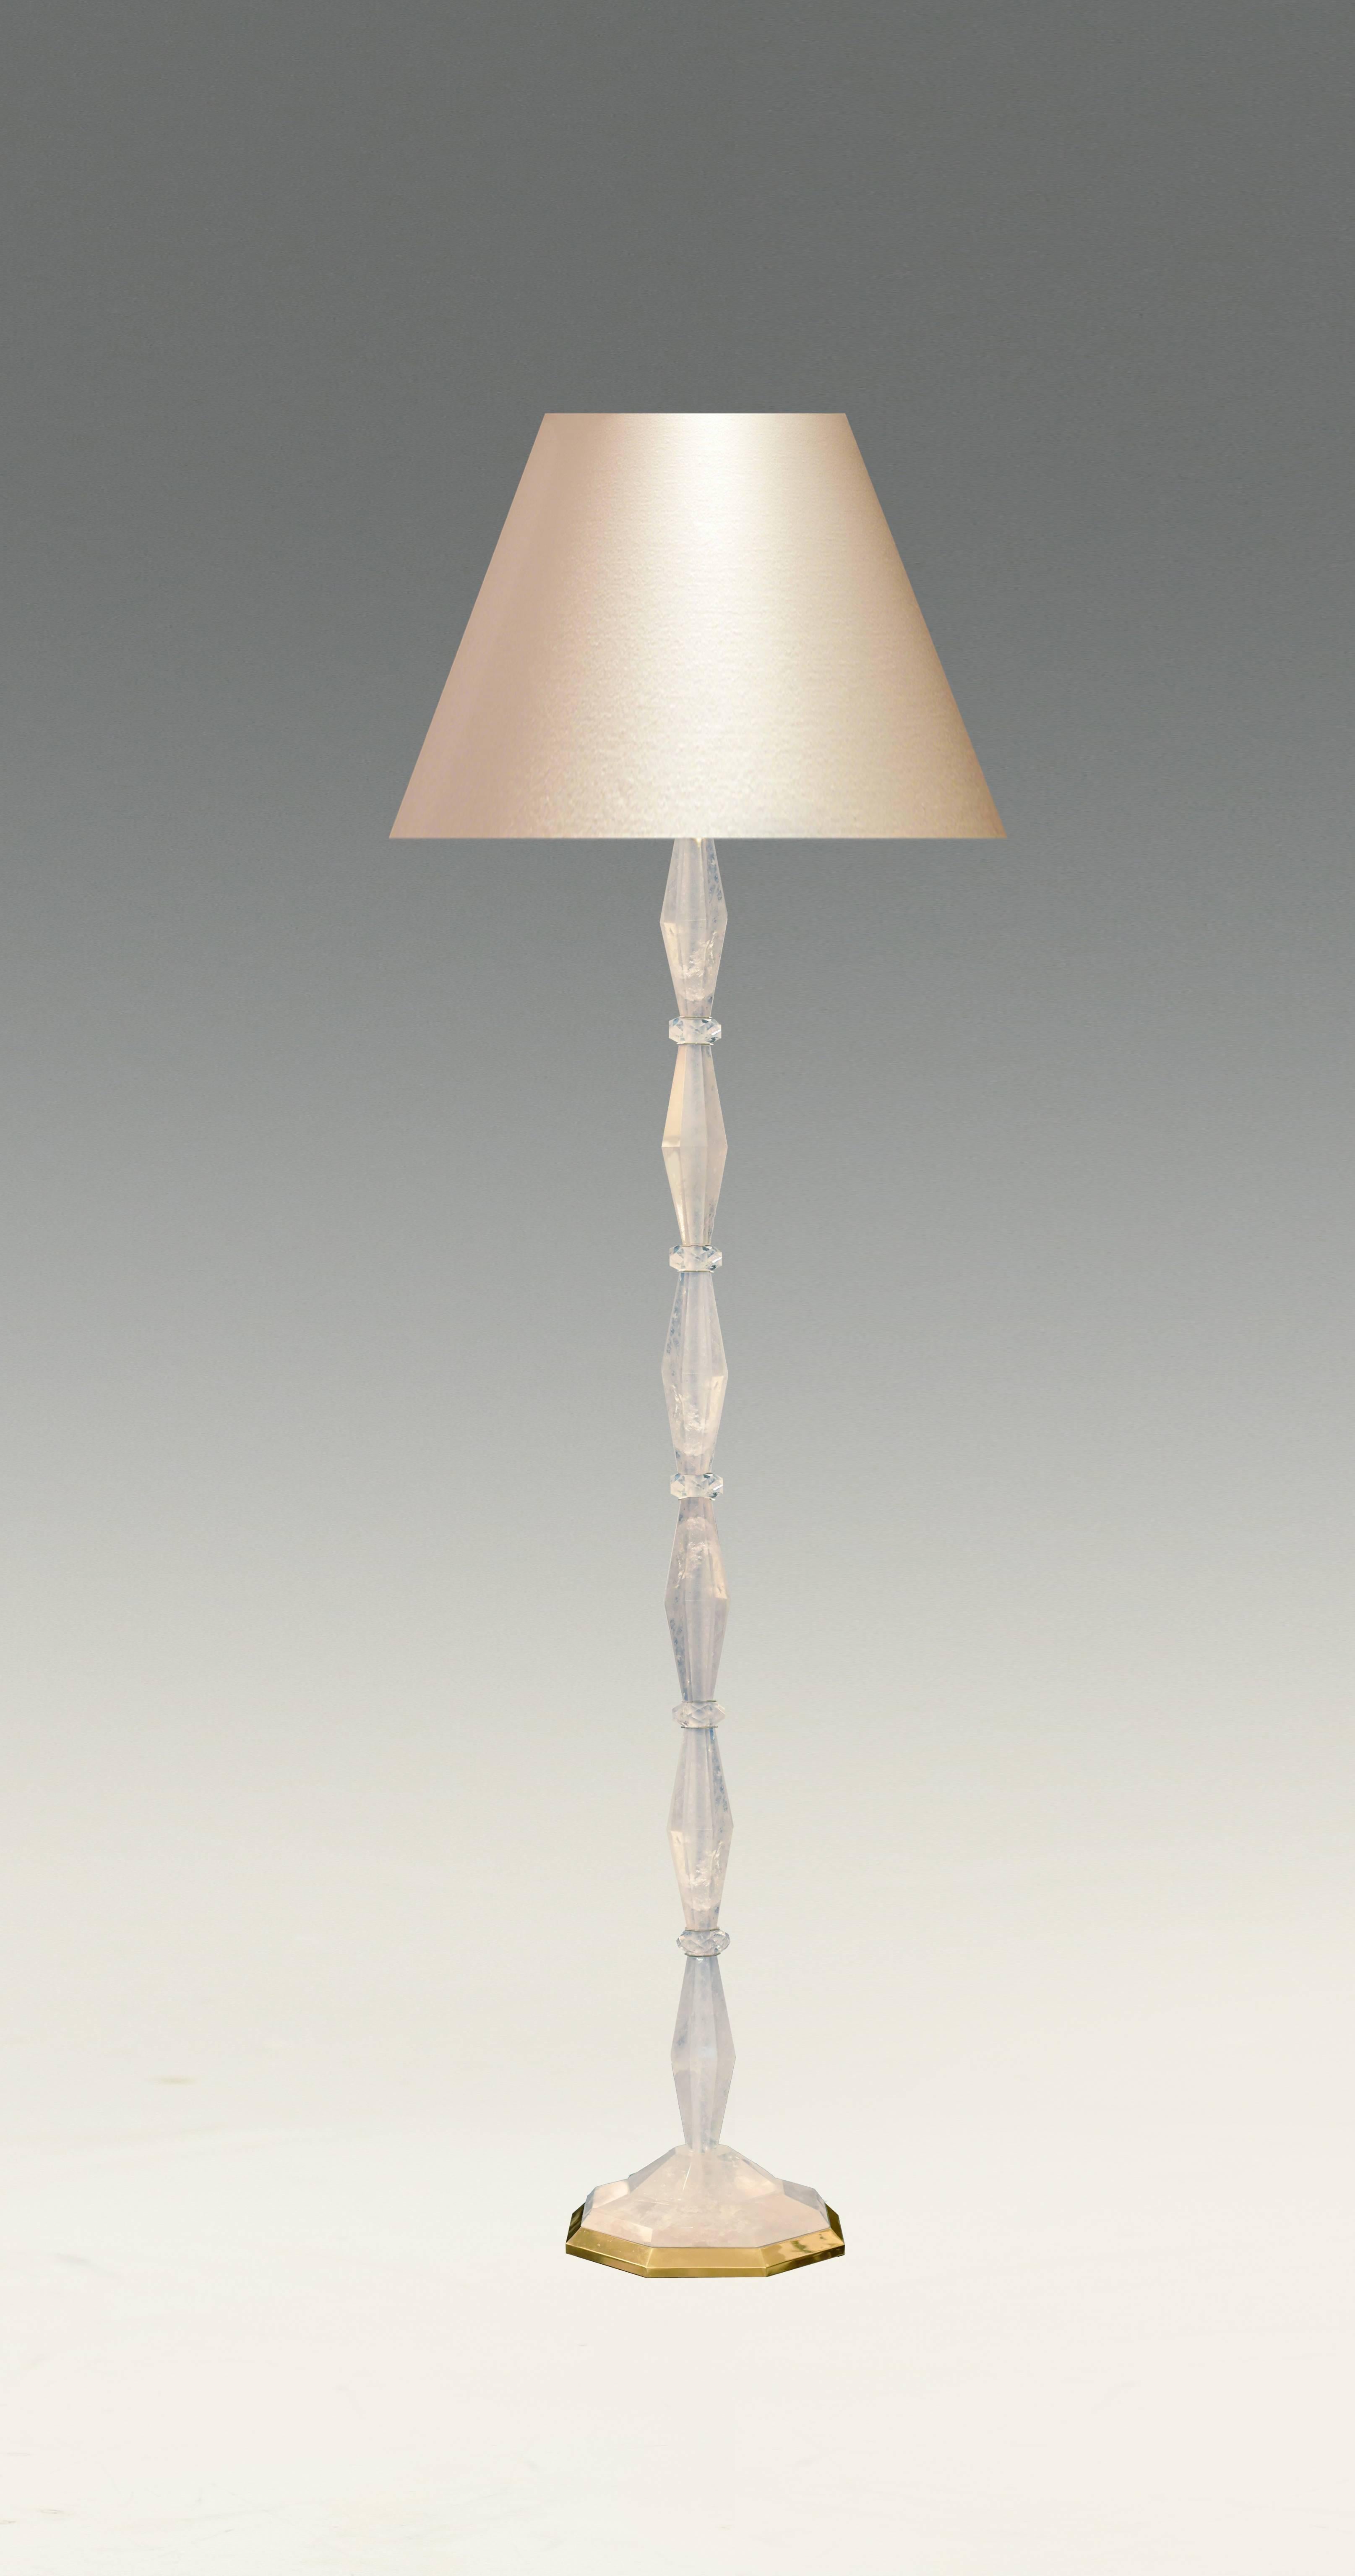 A carved diamond form rock crystal quartz floor lamp with gilt base, created by Phoenix Gallery, NYC.
To the rock crystal: 56 inch H.
(Lampshade not included)
